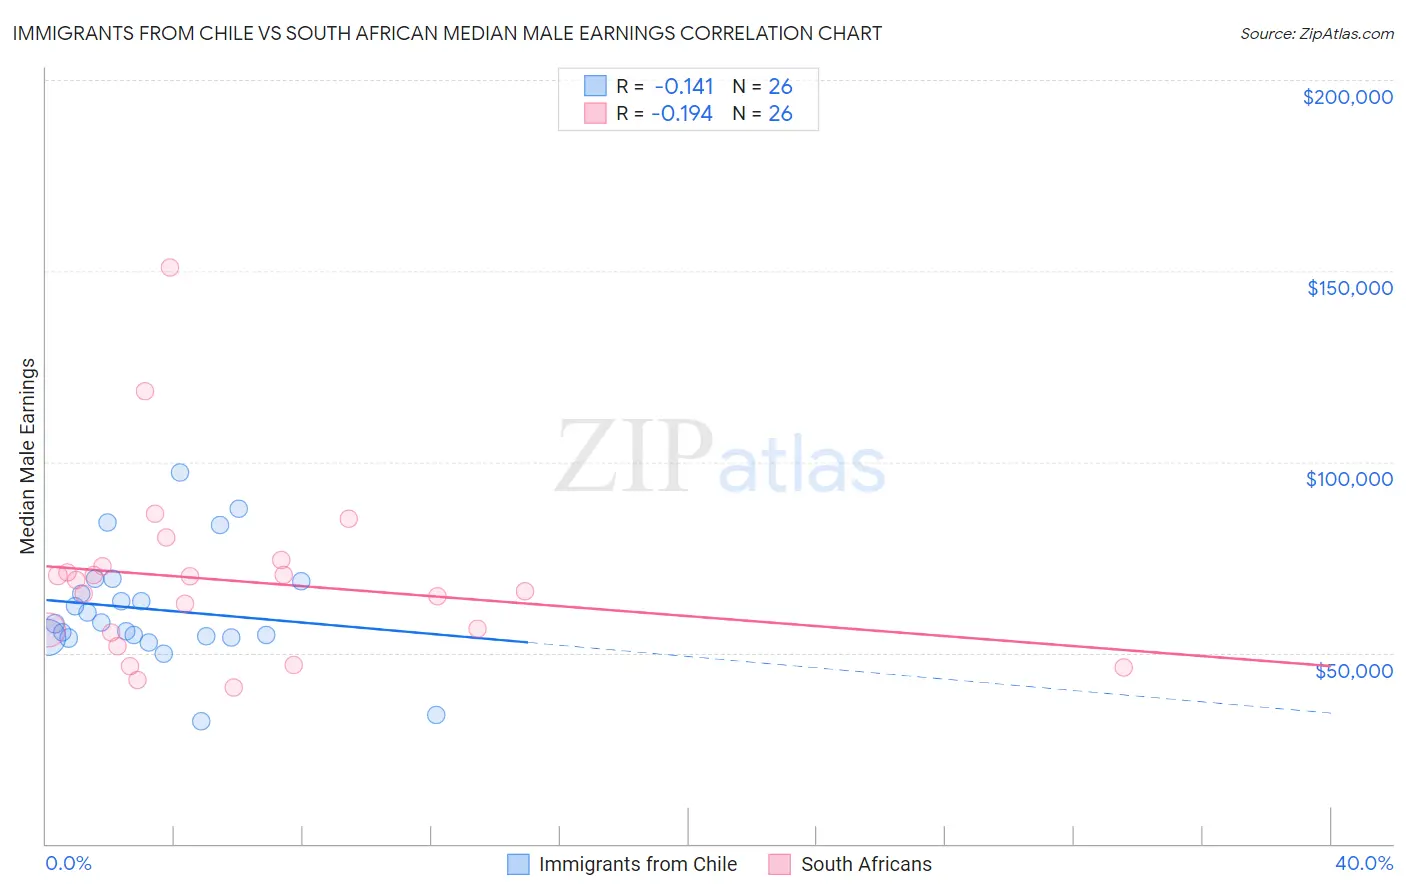 Immigrants from Chile vs South African Median Male Earnings